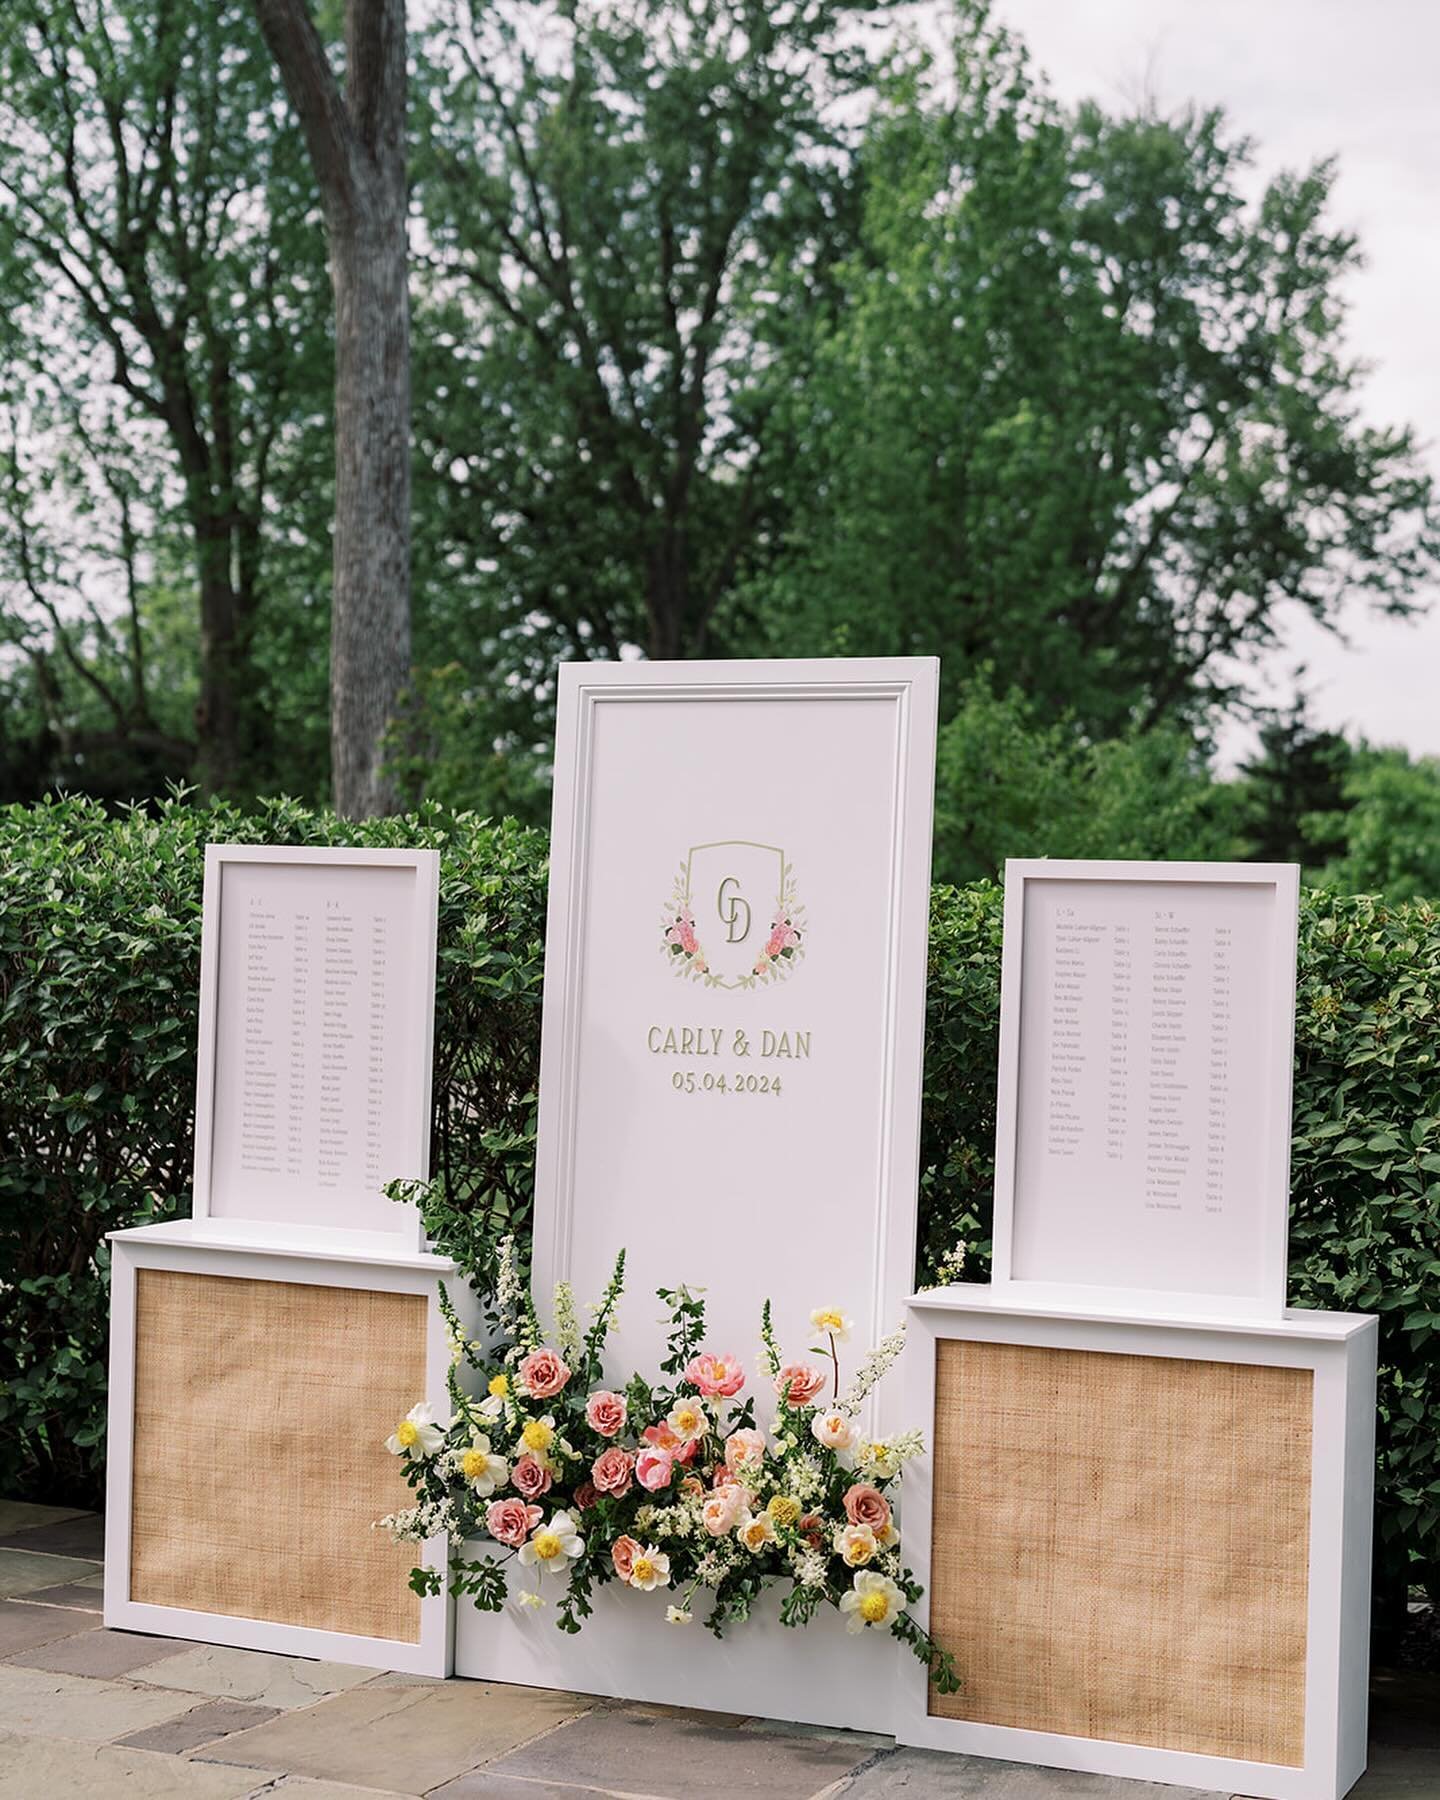 A full service design that weaved rattan, a spring color palette, and dainty art details from beginning to end.

Items provided: 
Invitation Suite
Seating Chart
Bar Signs
Menus
Placecards
Table Numbers
Bar Vinyl Art
Dj Booth Facade

Planning &amp; De